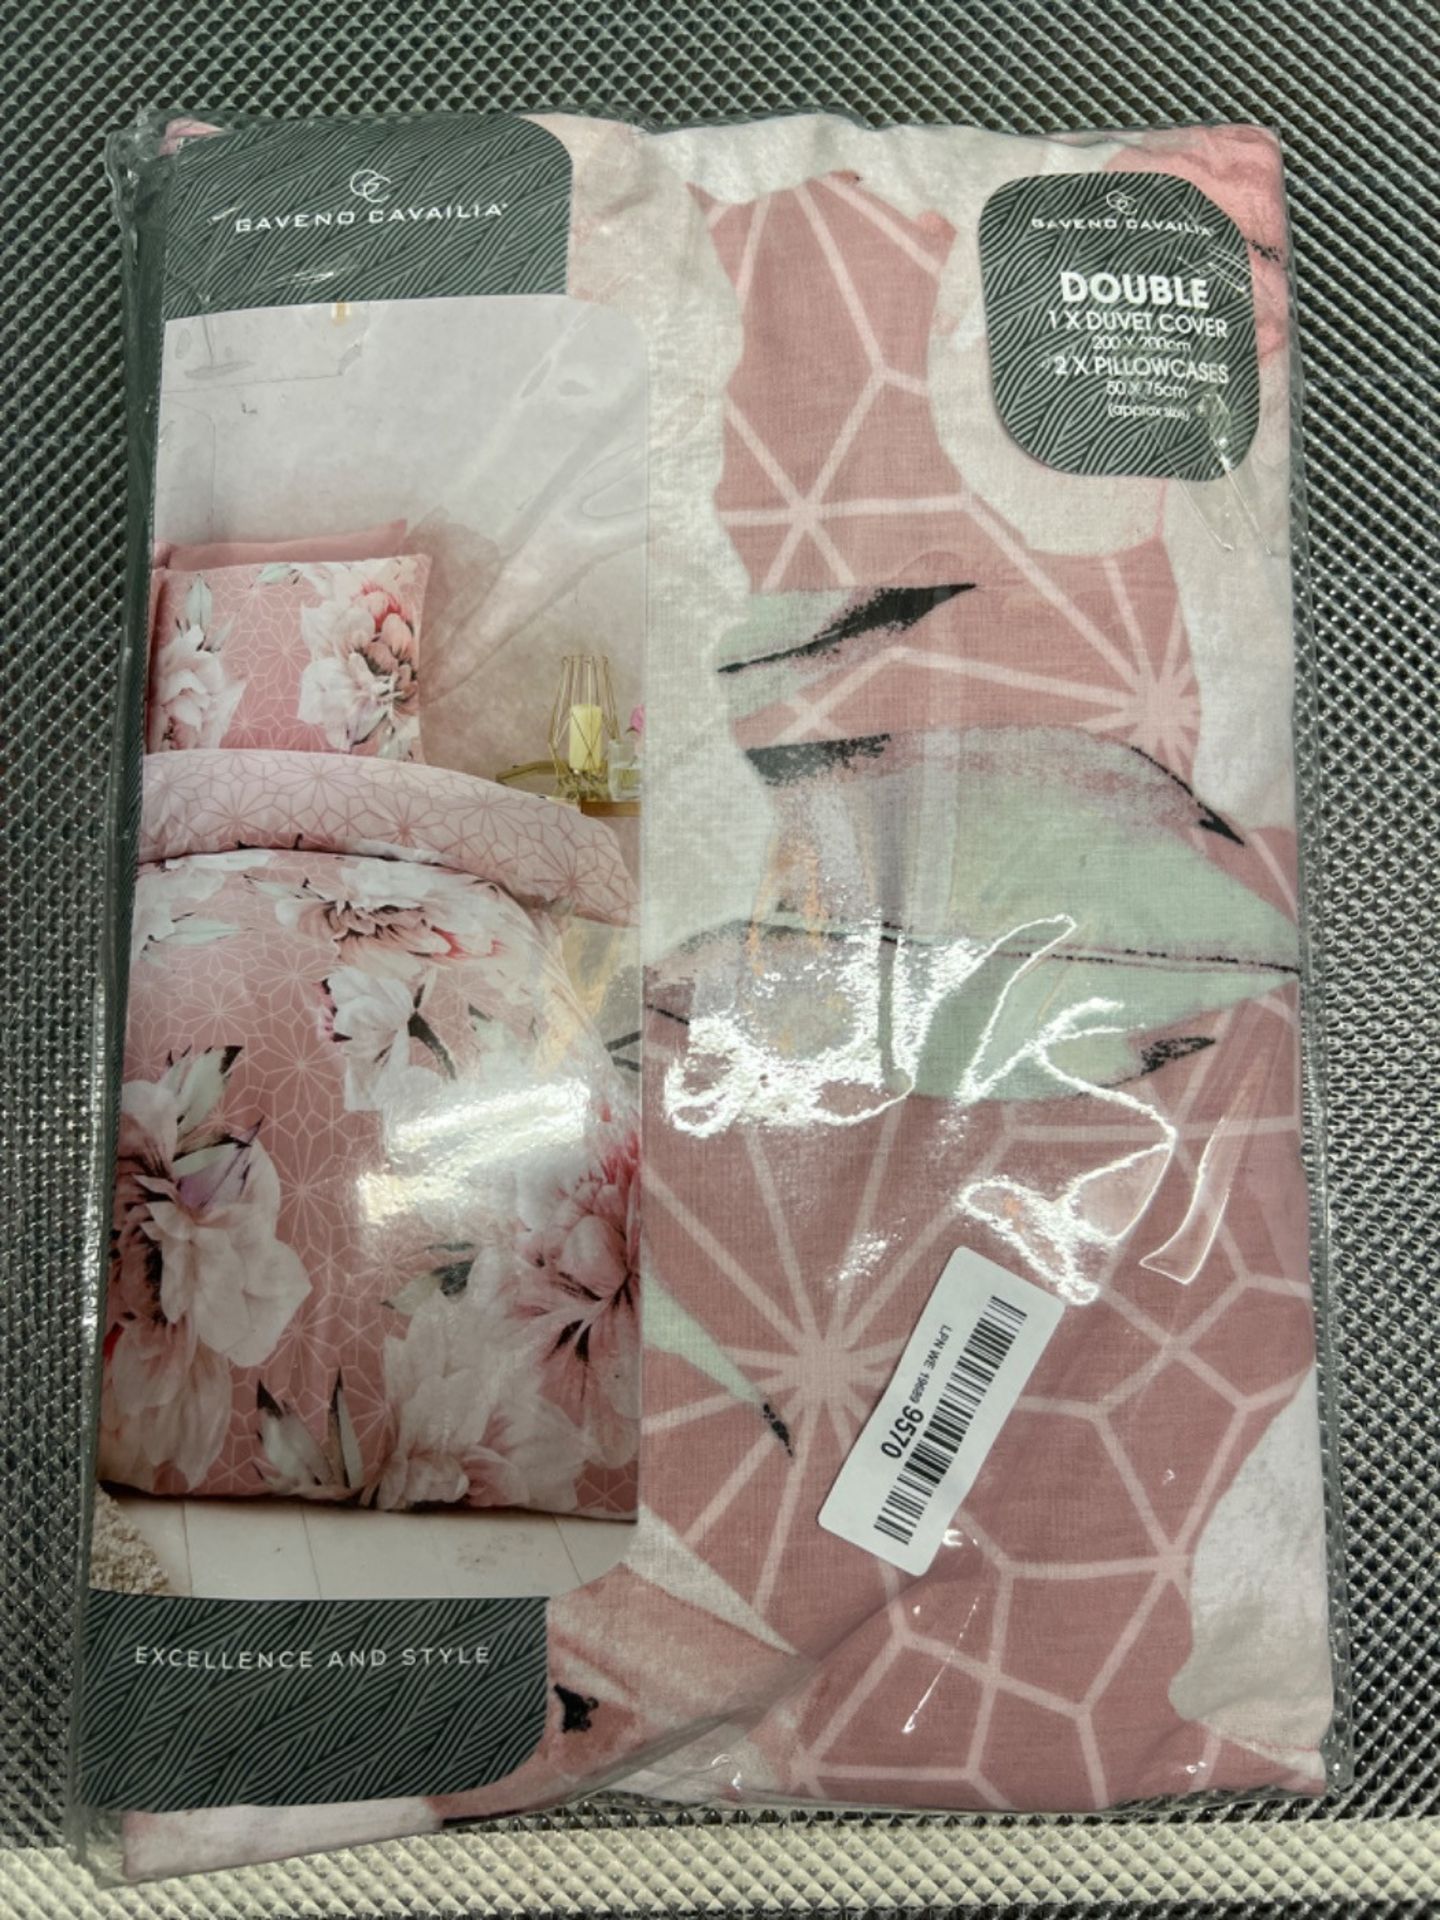 GC GAVENO CAVAILIA Large Floral Patterned Duvet Cover Watercolour Blush Pink, Easy Care Poly Cotton - Image 2 of 3